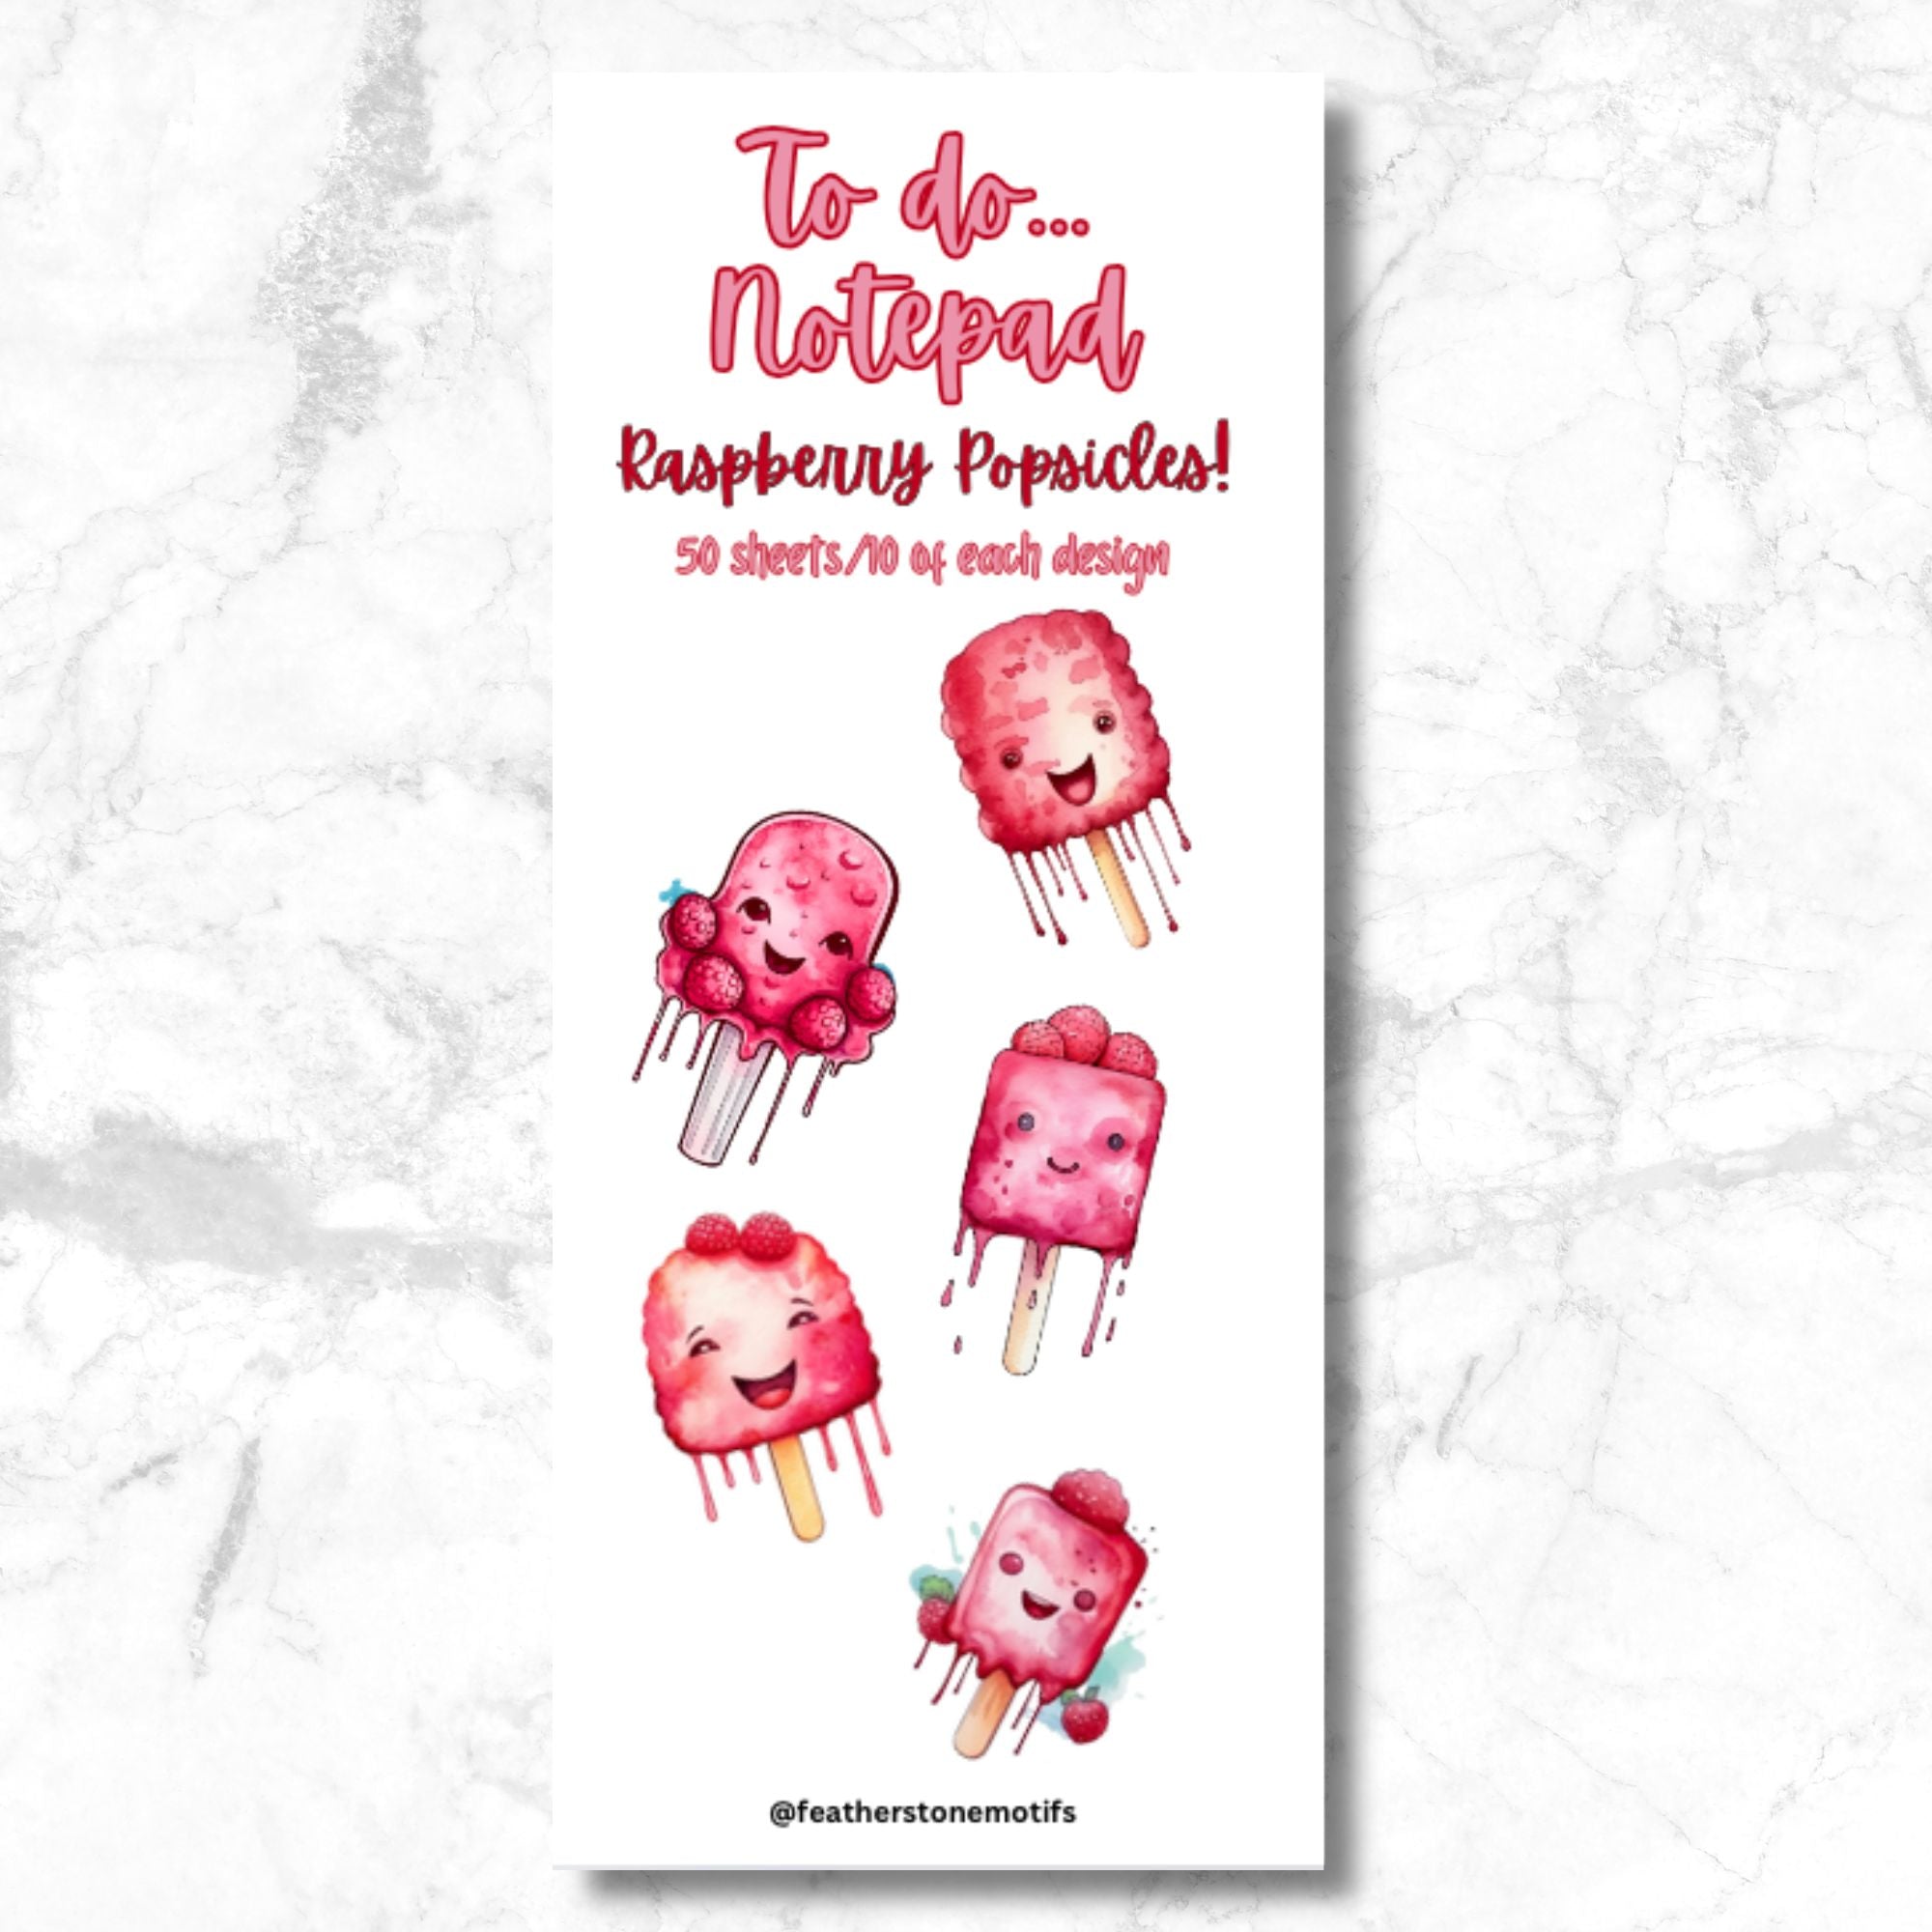 This image shows the over of the To-Do... Notepad - Raspberry Popsicles.